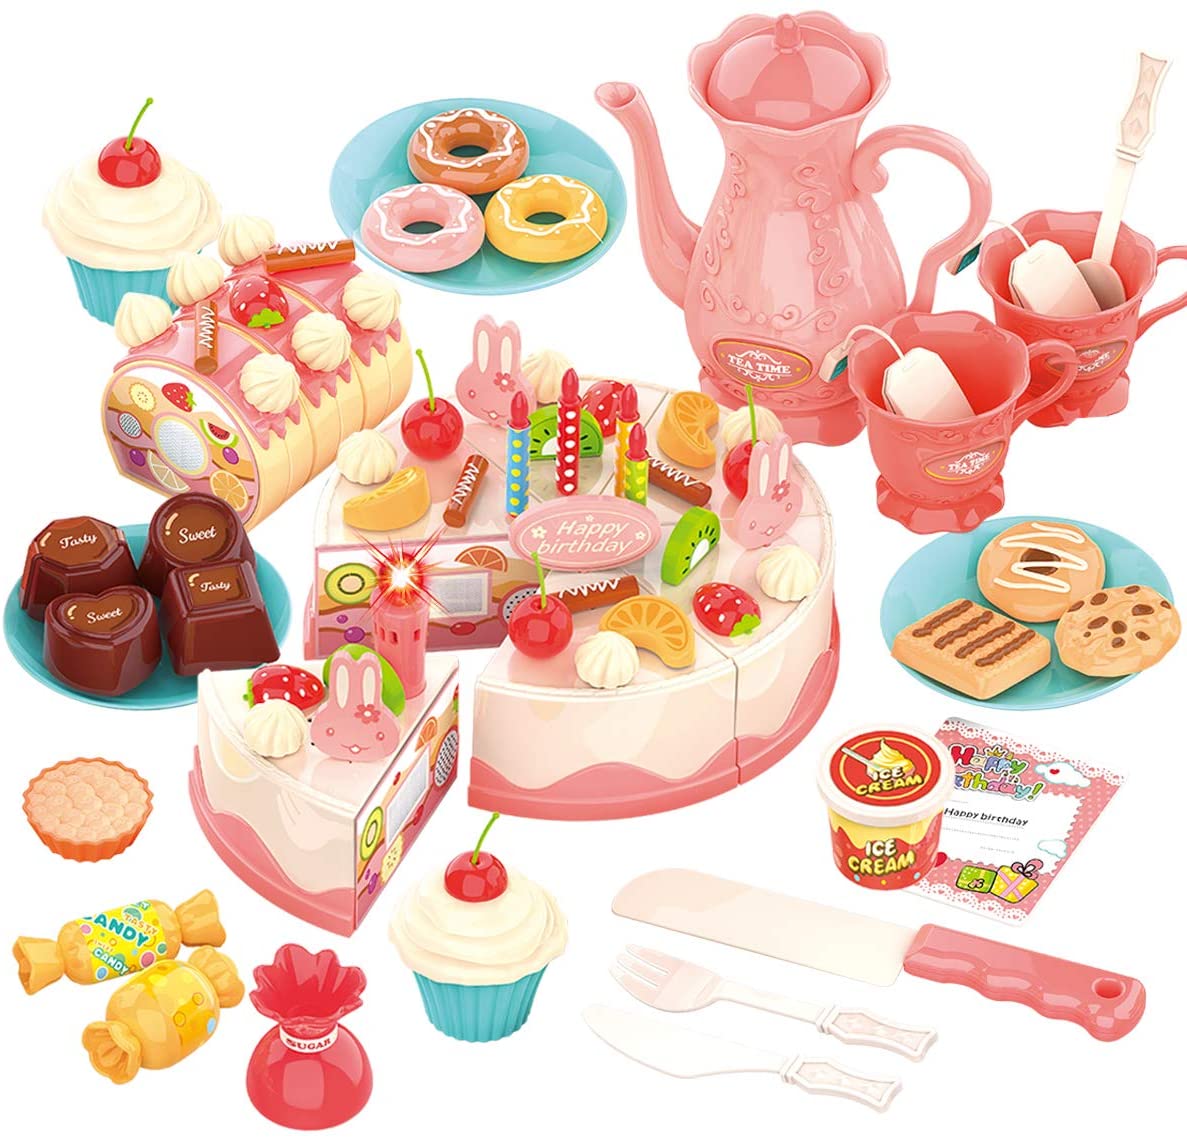 Pretend Play Food for Kids,DIY 82PCS Decorating and Cutting Birthday Party Cake, Tea Set,Candle,Fruits,Biscuits,Desserts,Educational Kitchen Toy with Lights&Sounds for Children,Girls&Boys,Aged 3+